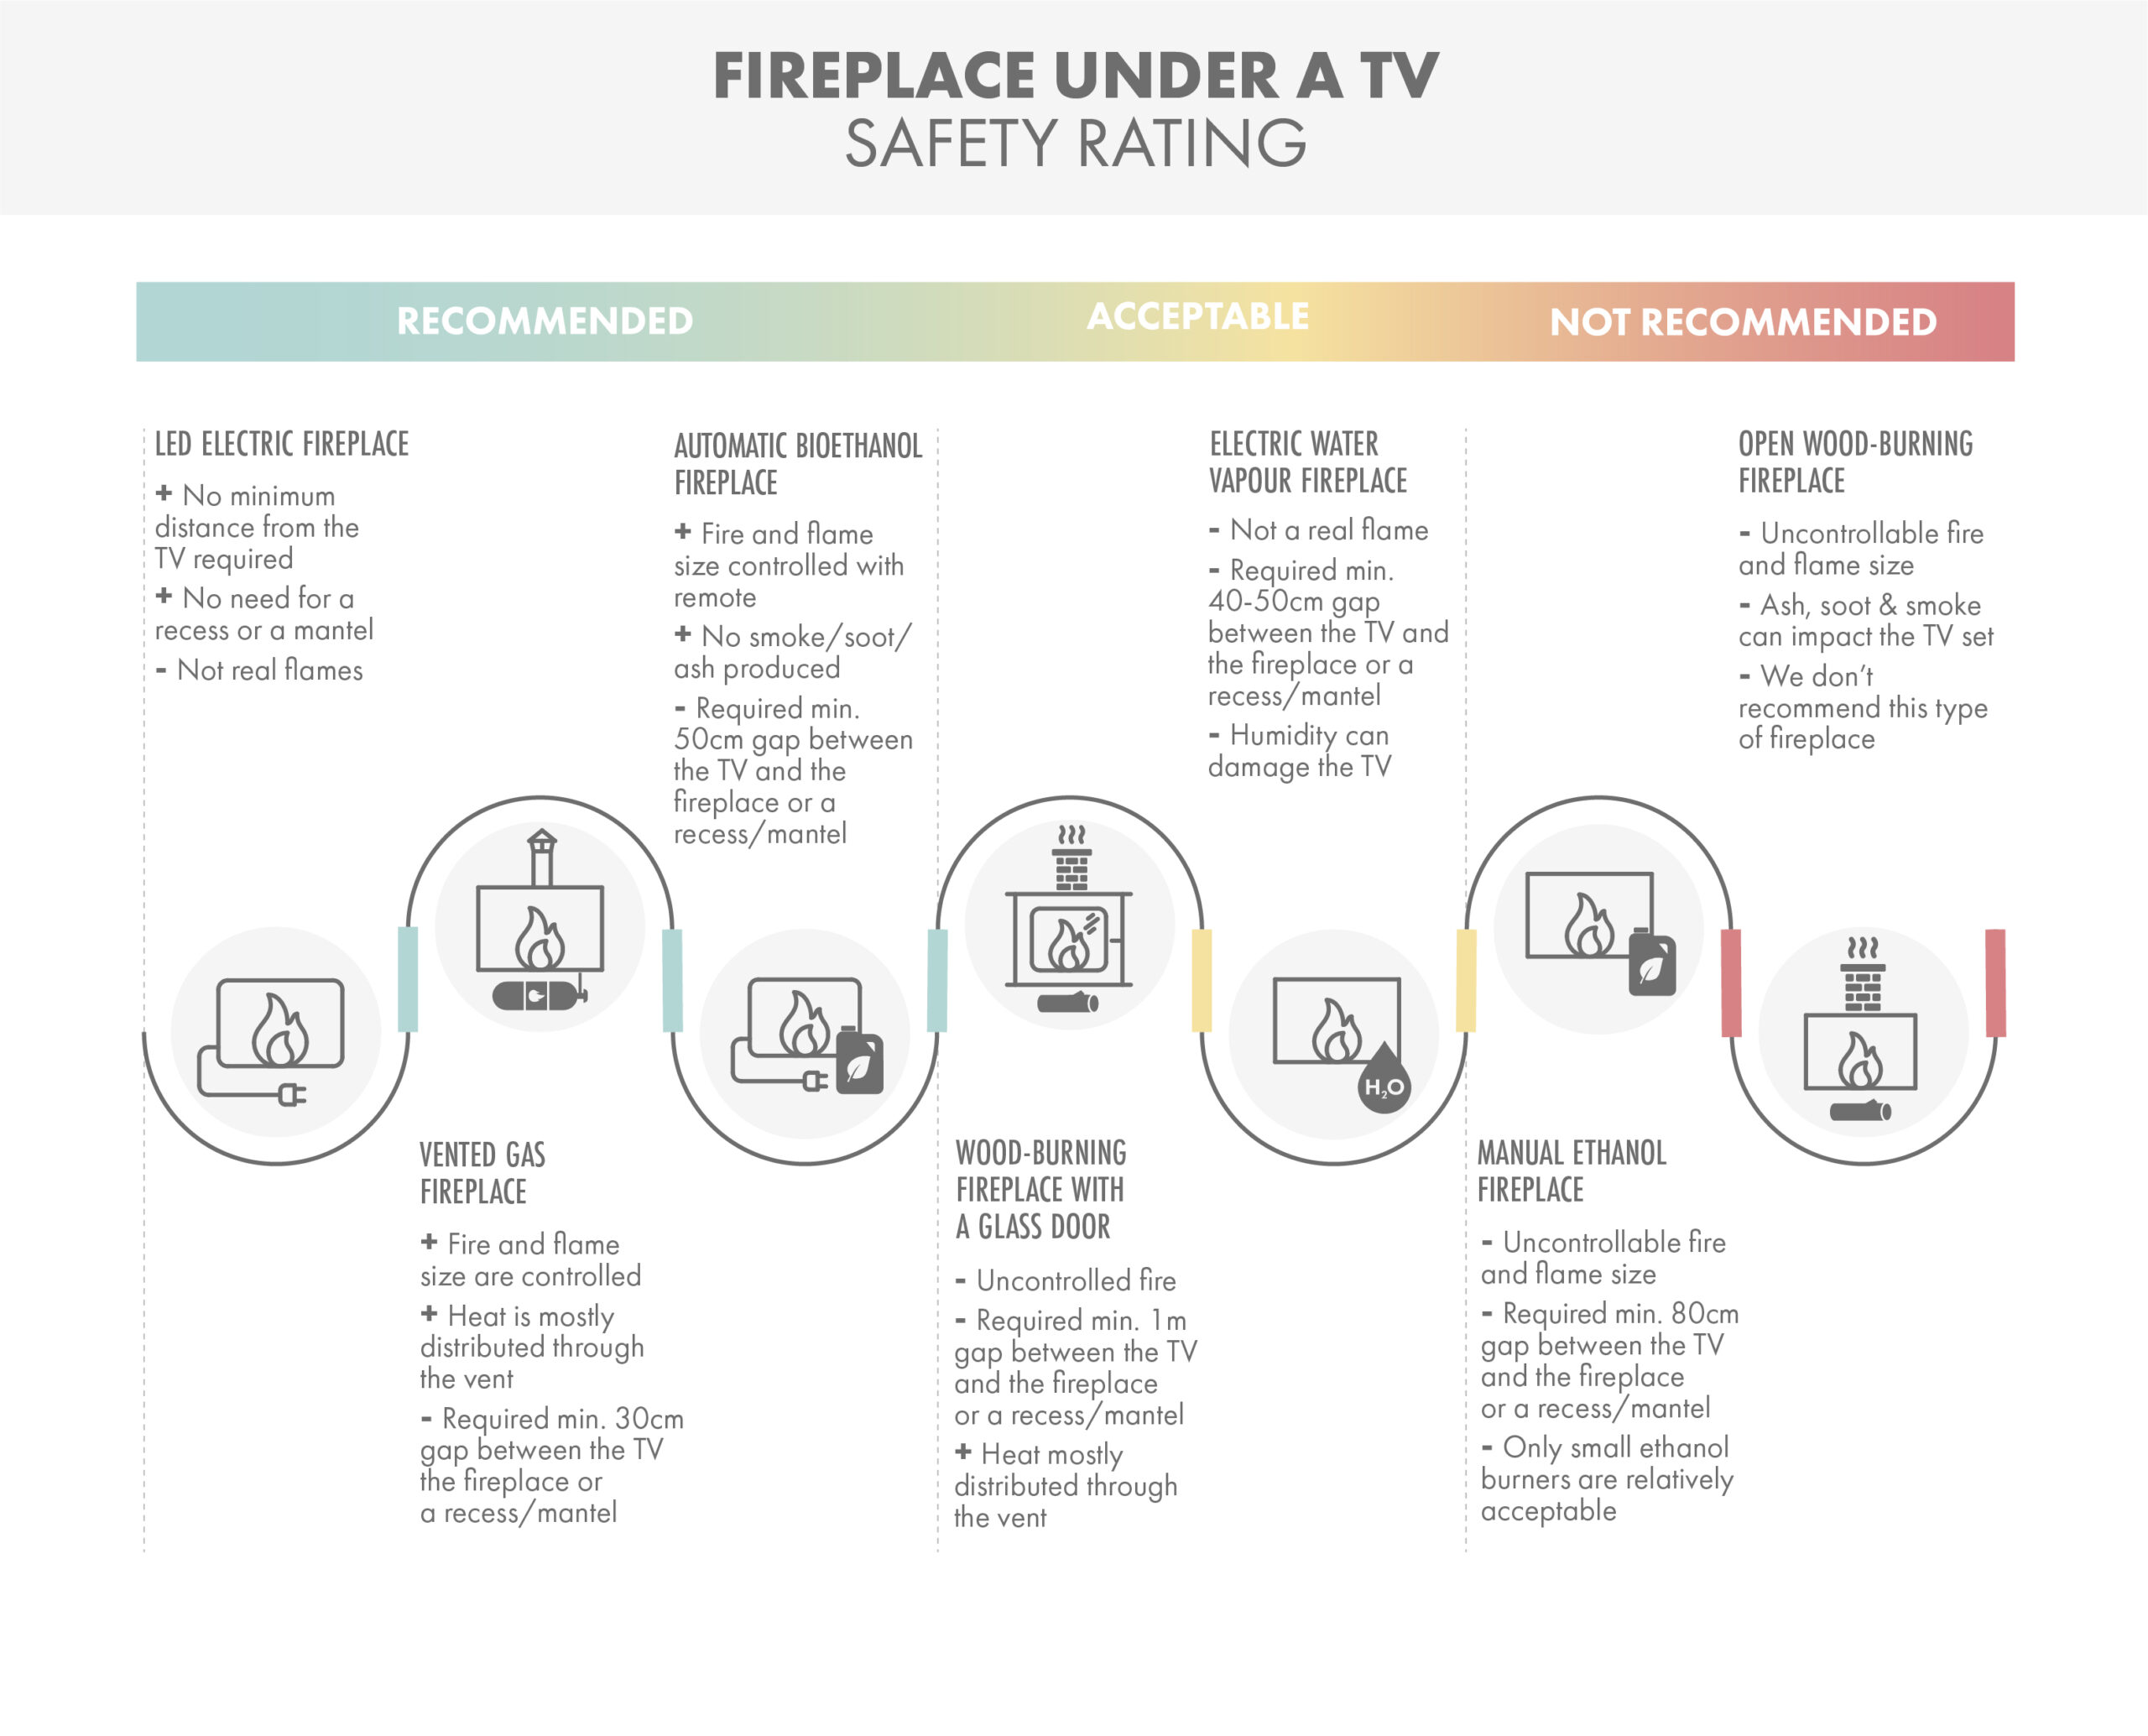 Safety Ranking of Fireplaces under a mounted TV flat screen